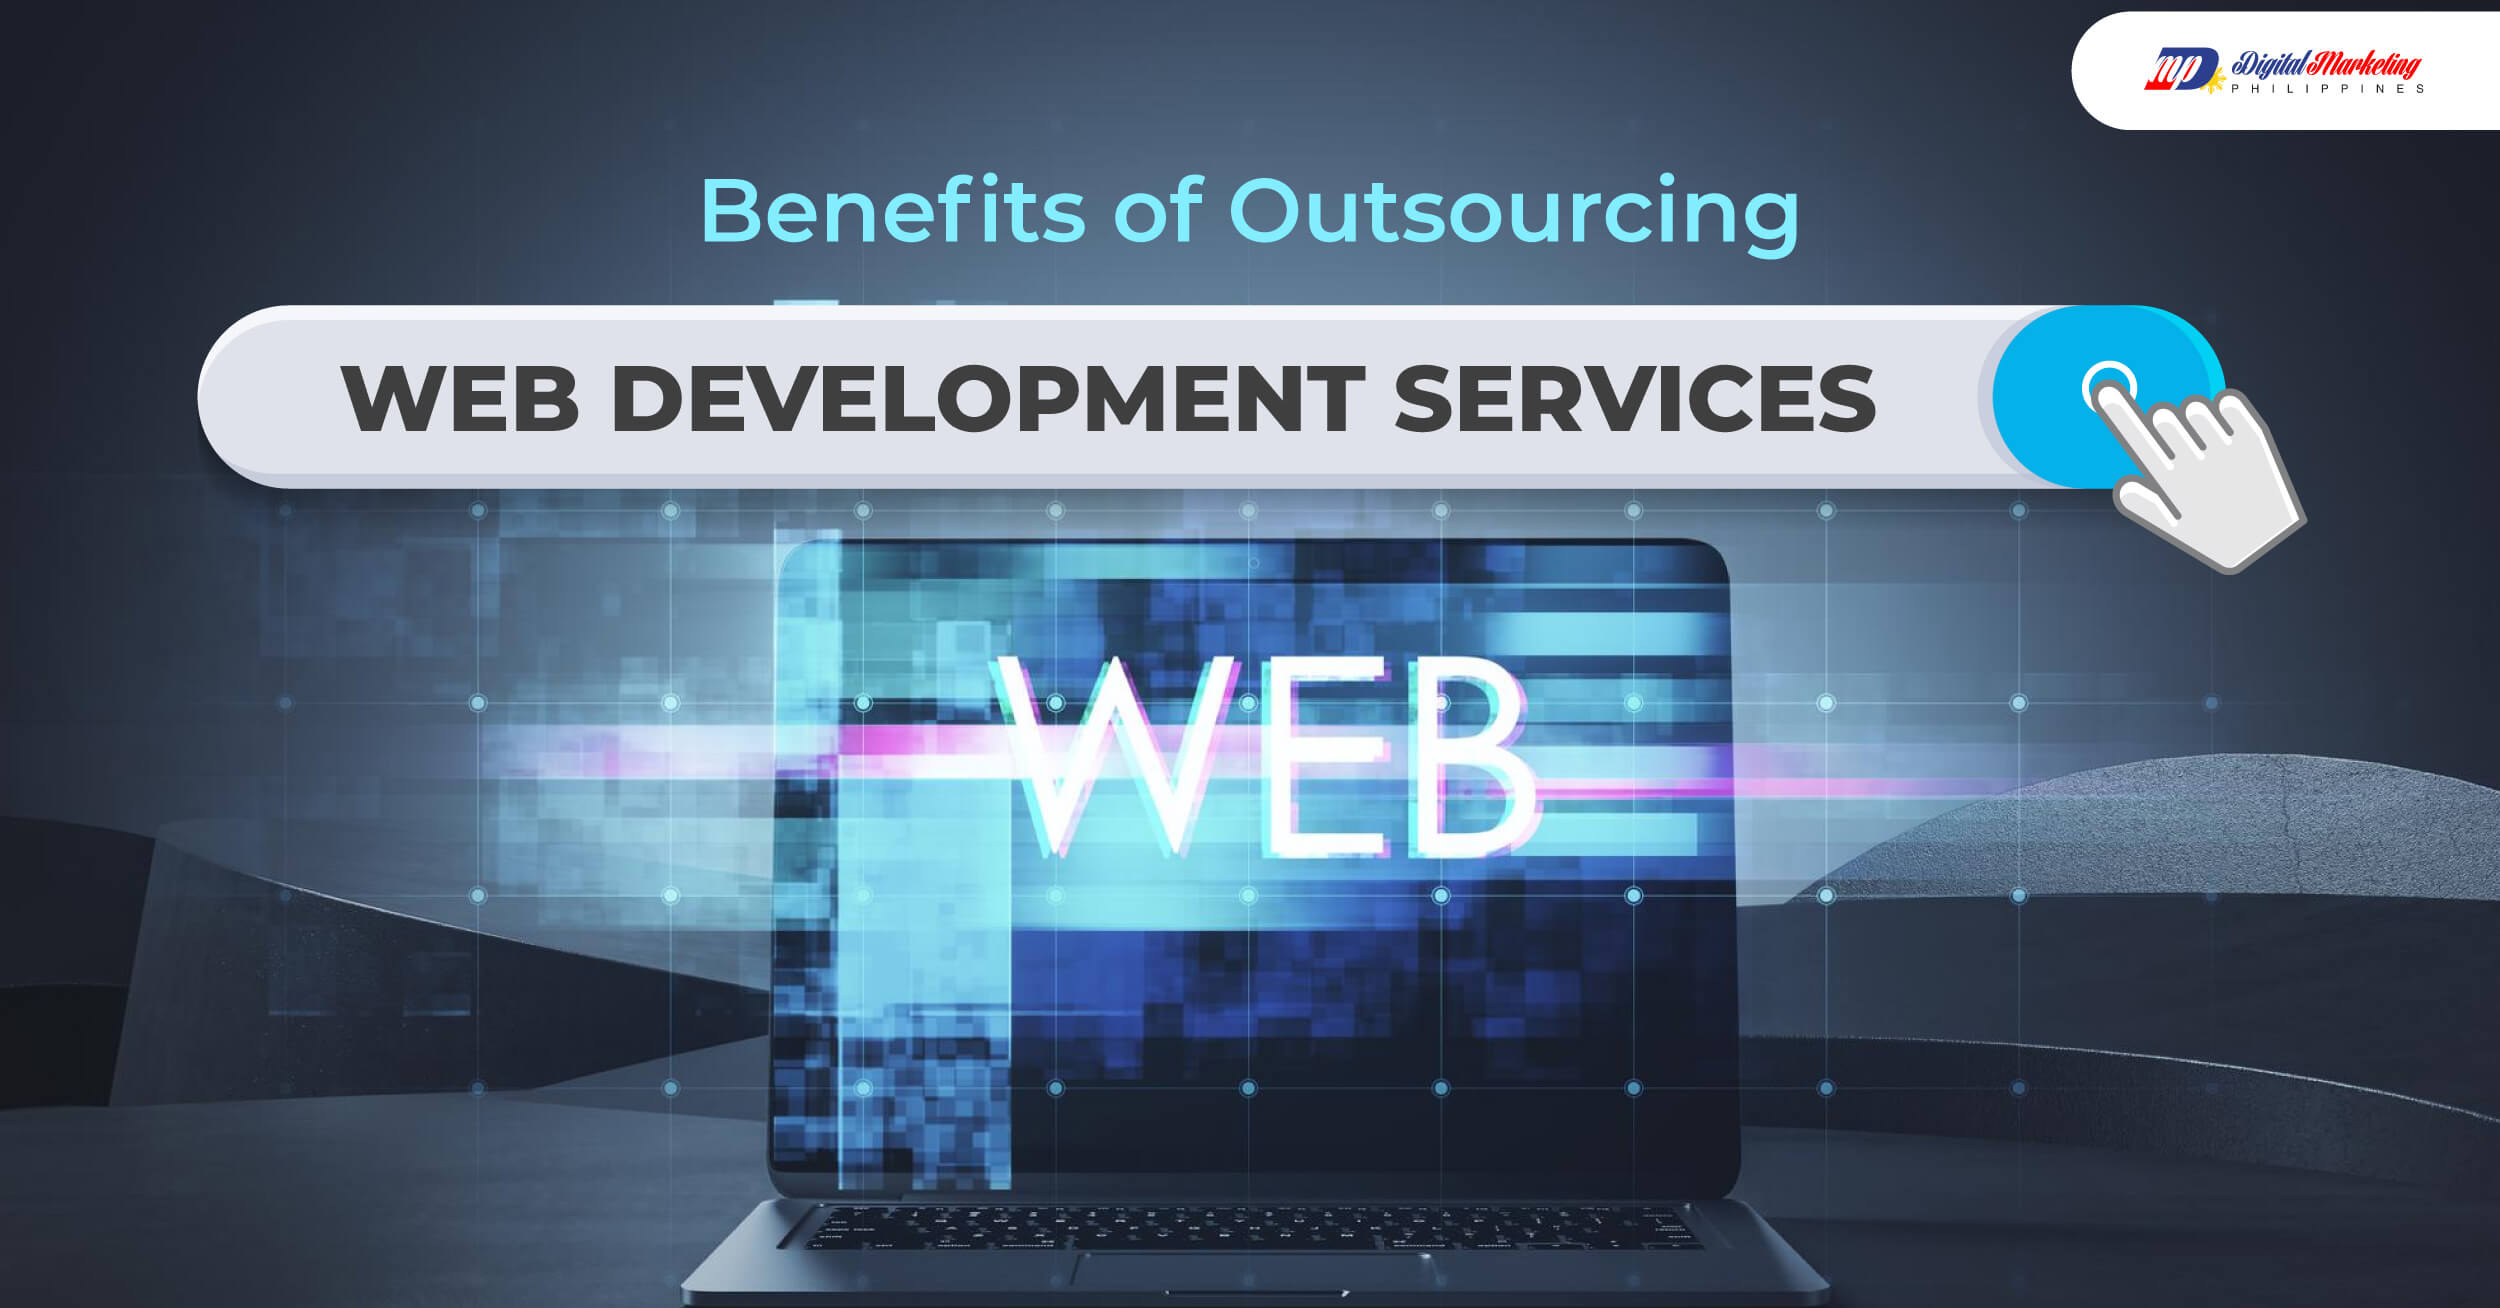 Benefits of Outsourcing Web Development Services